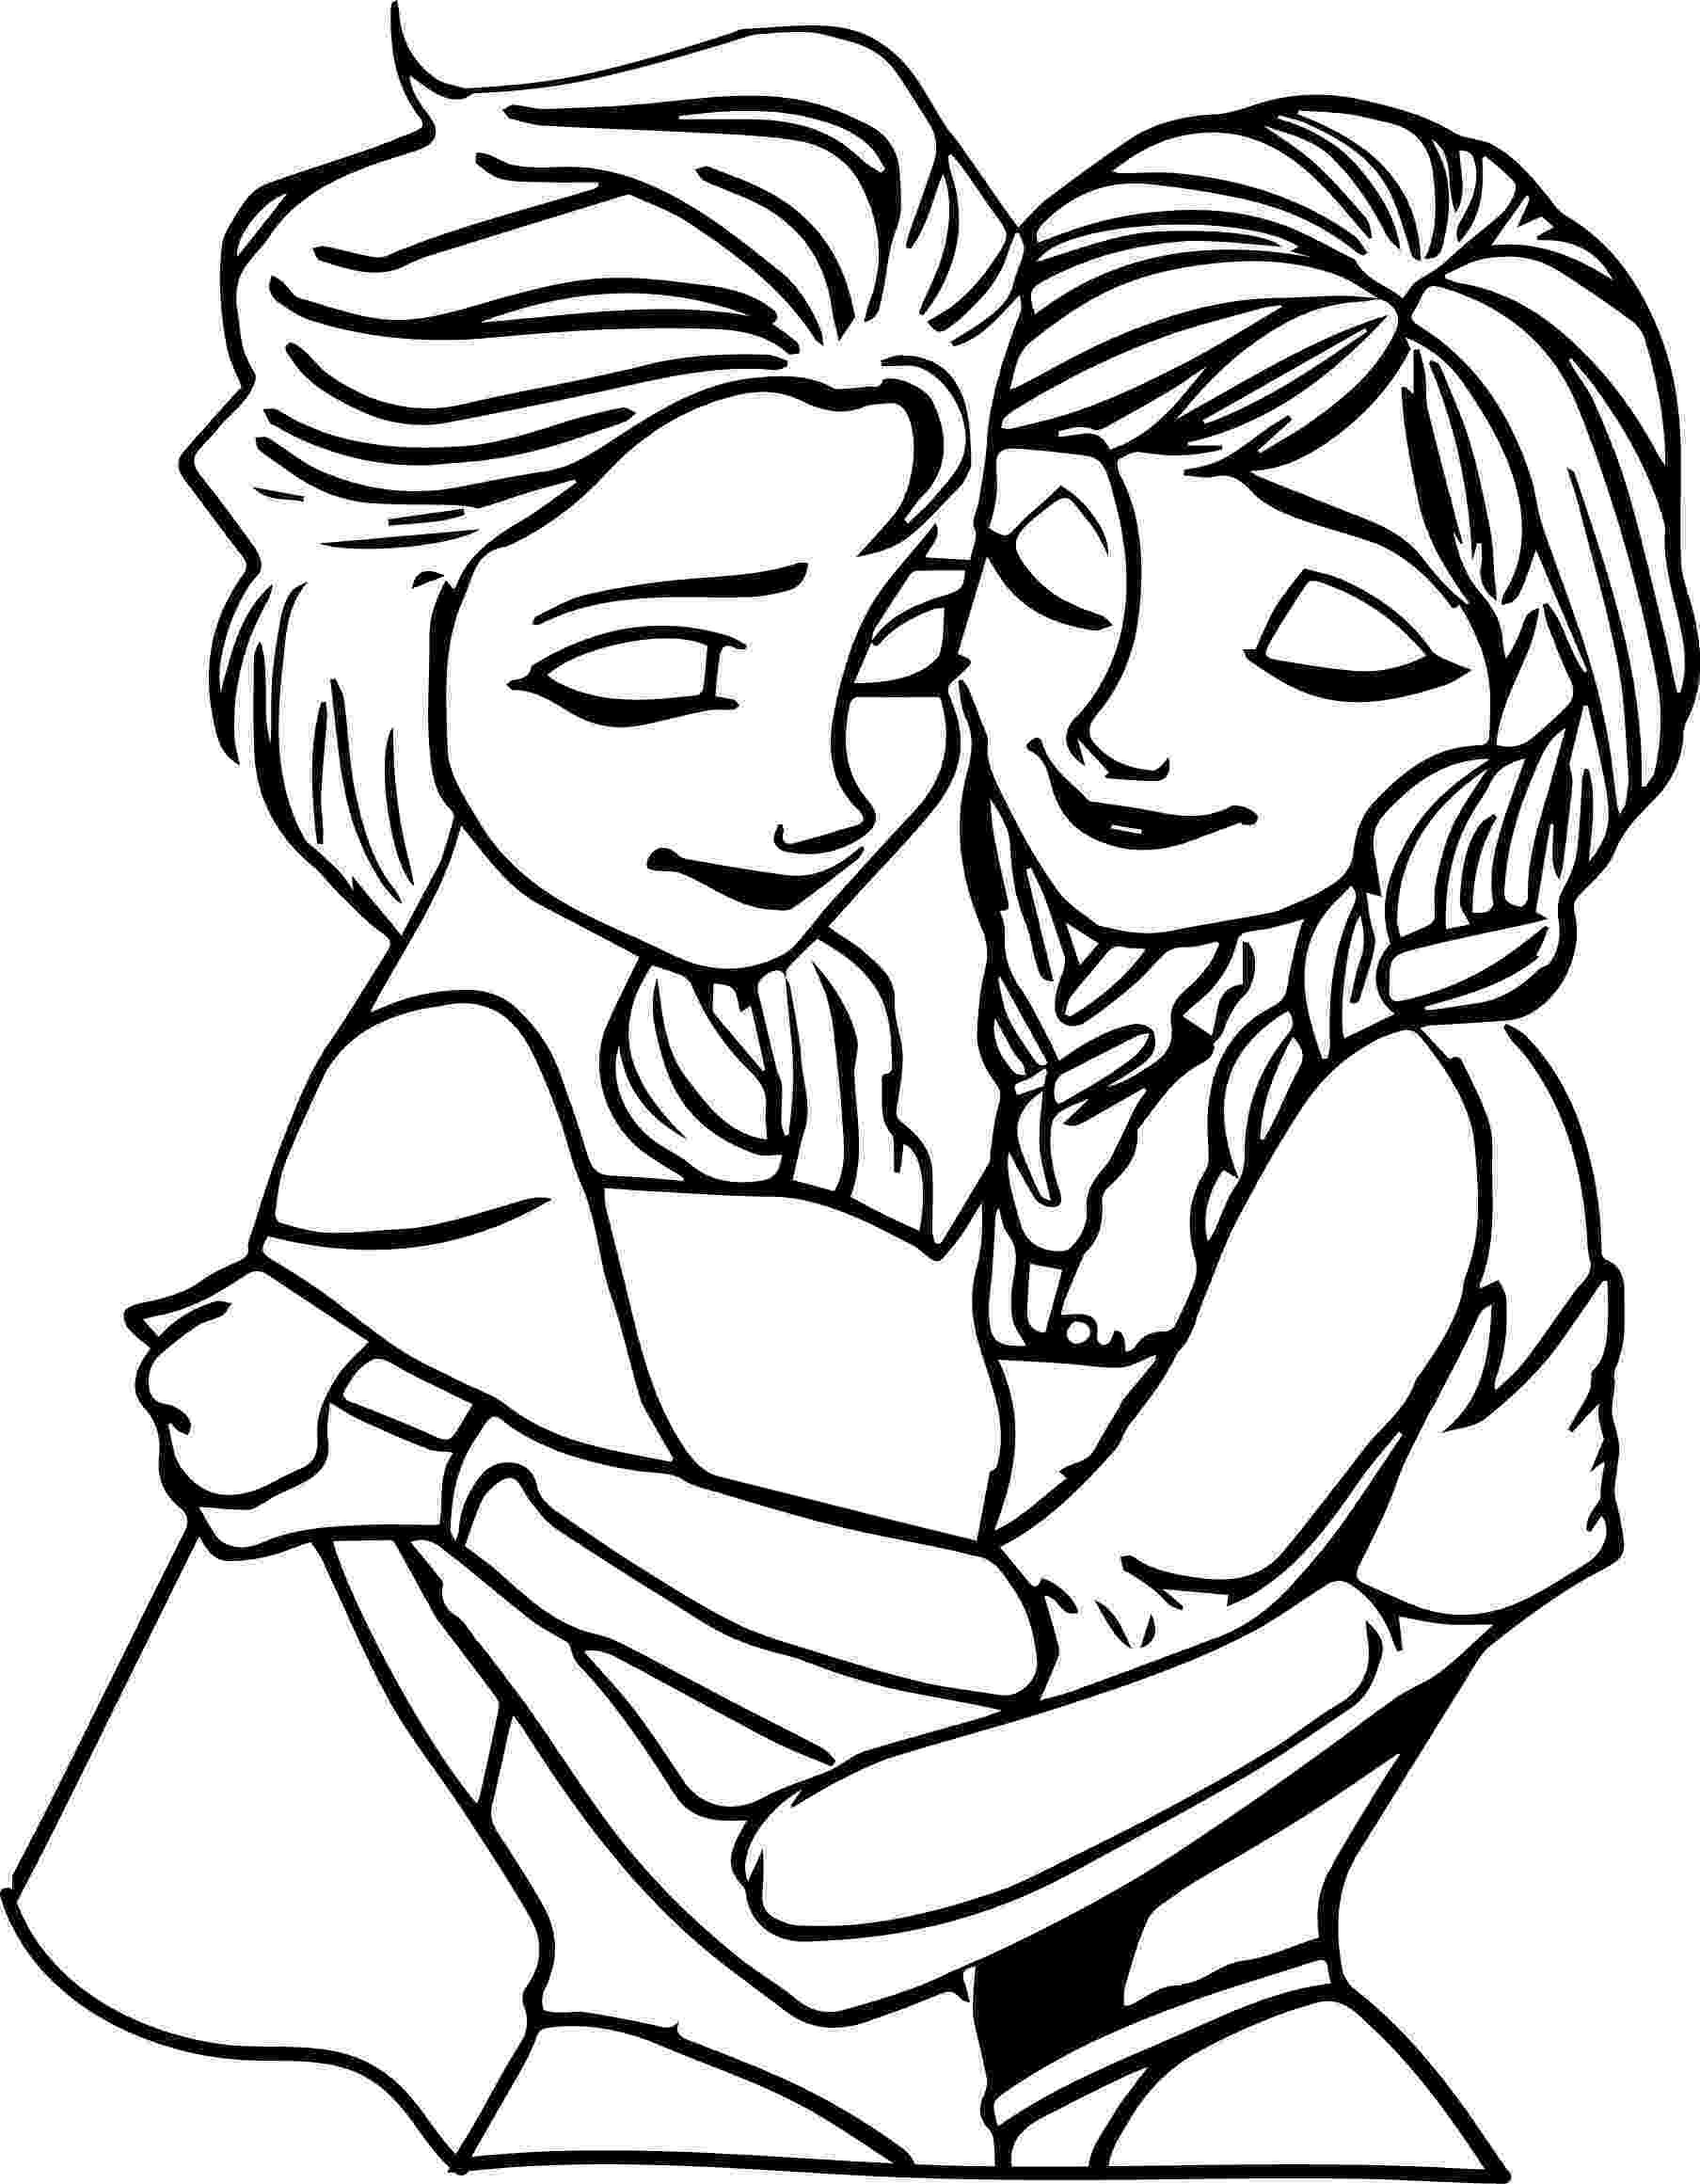 anna and elsa coloring pages elsa coloring pages free download best elsa coloring elsa and pages coloring anna 